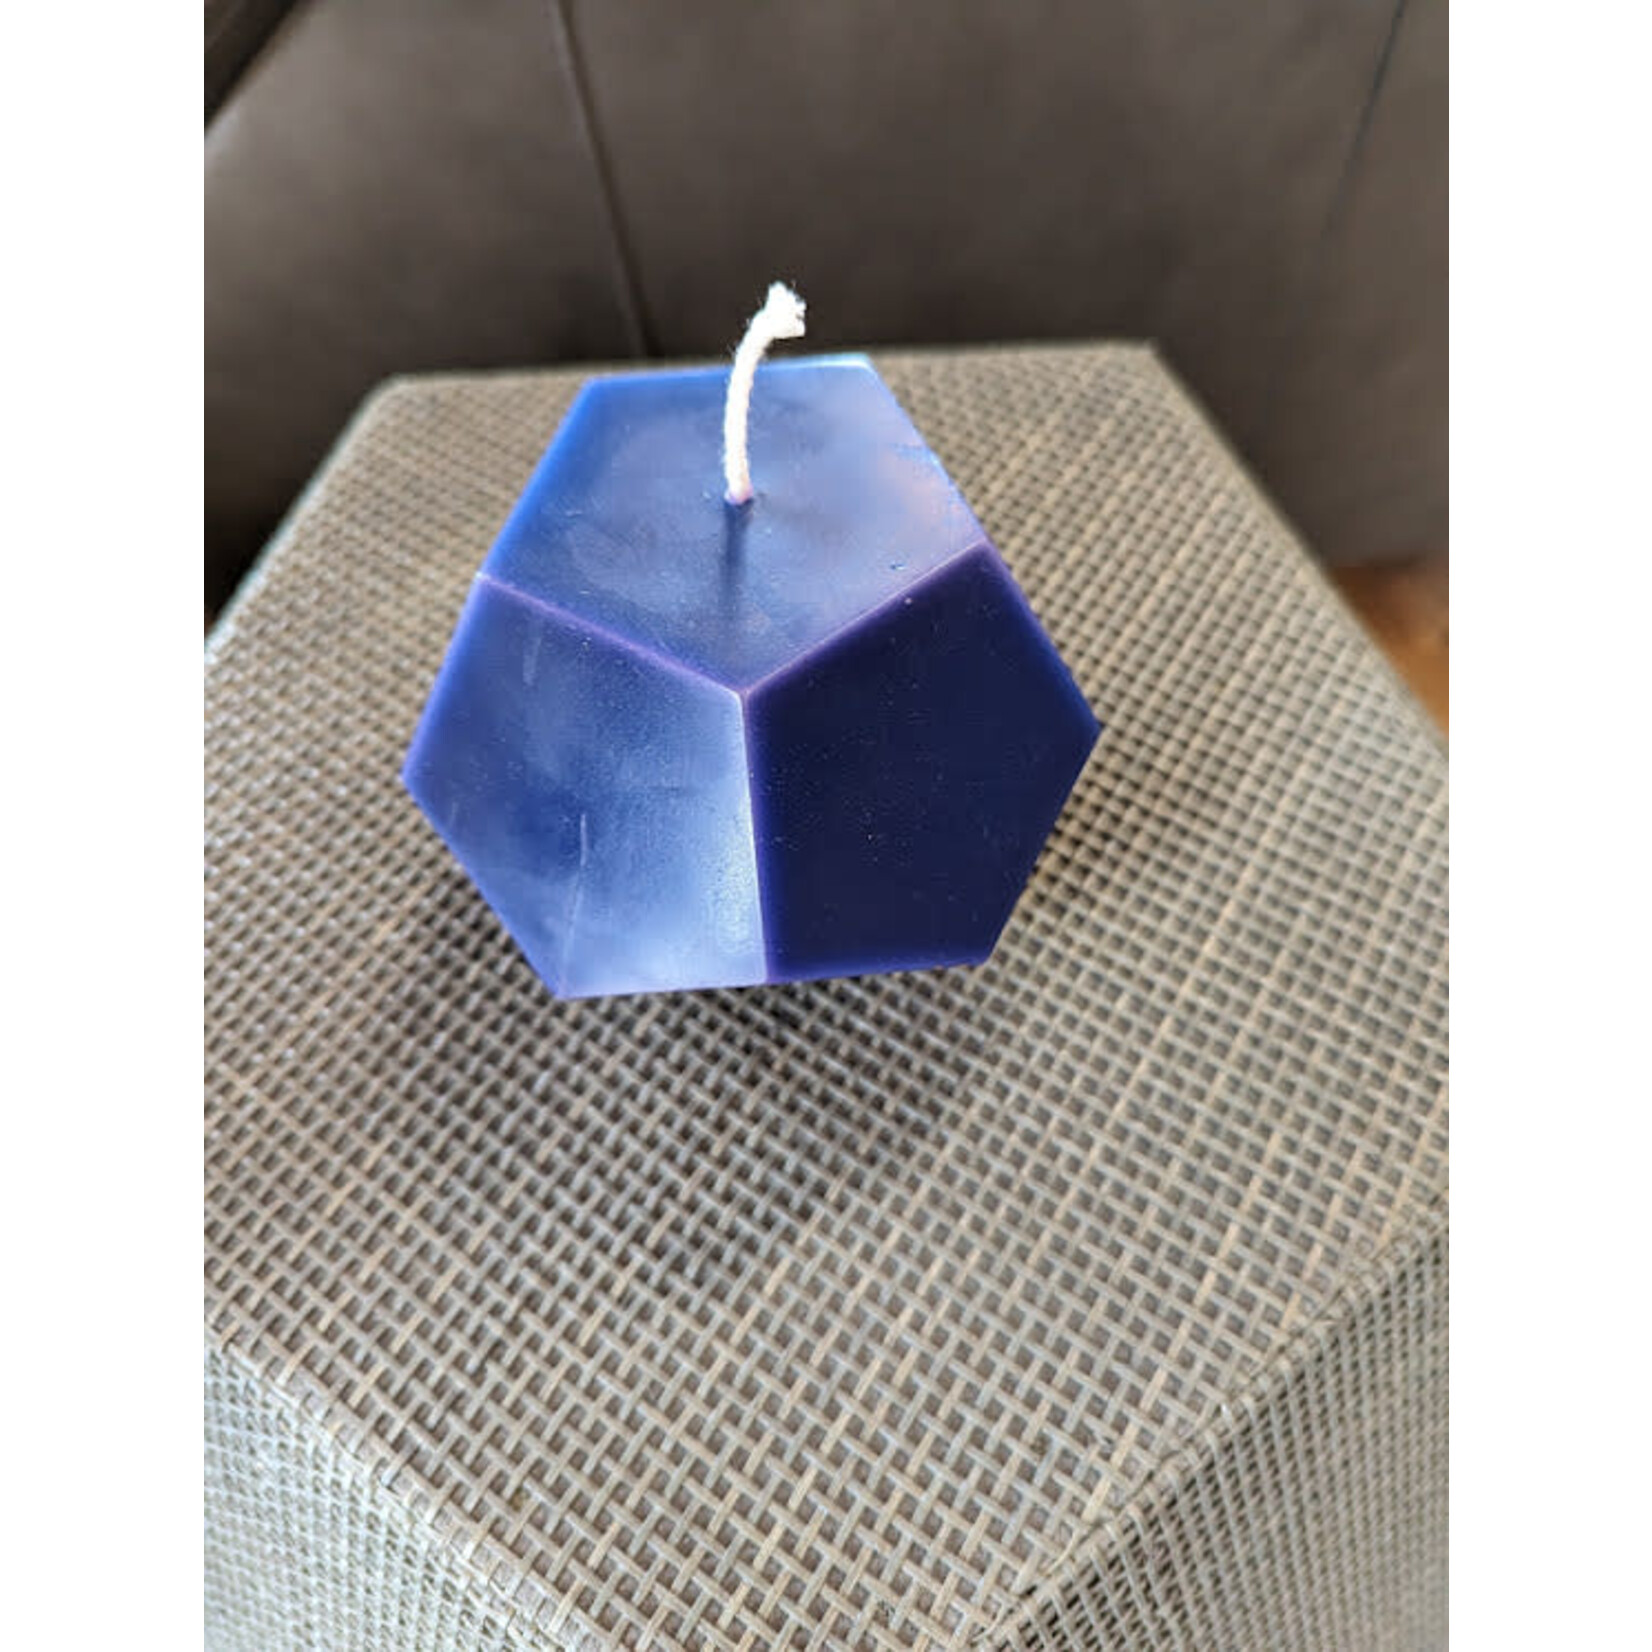 Greentree Home Dodecahedron Cobalt Candle